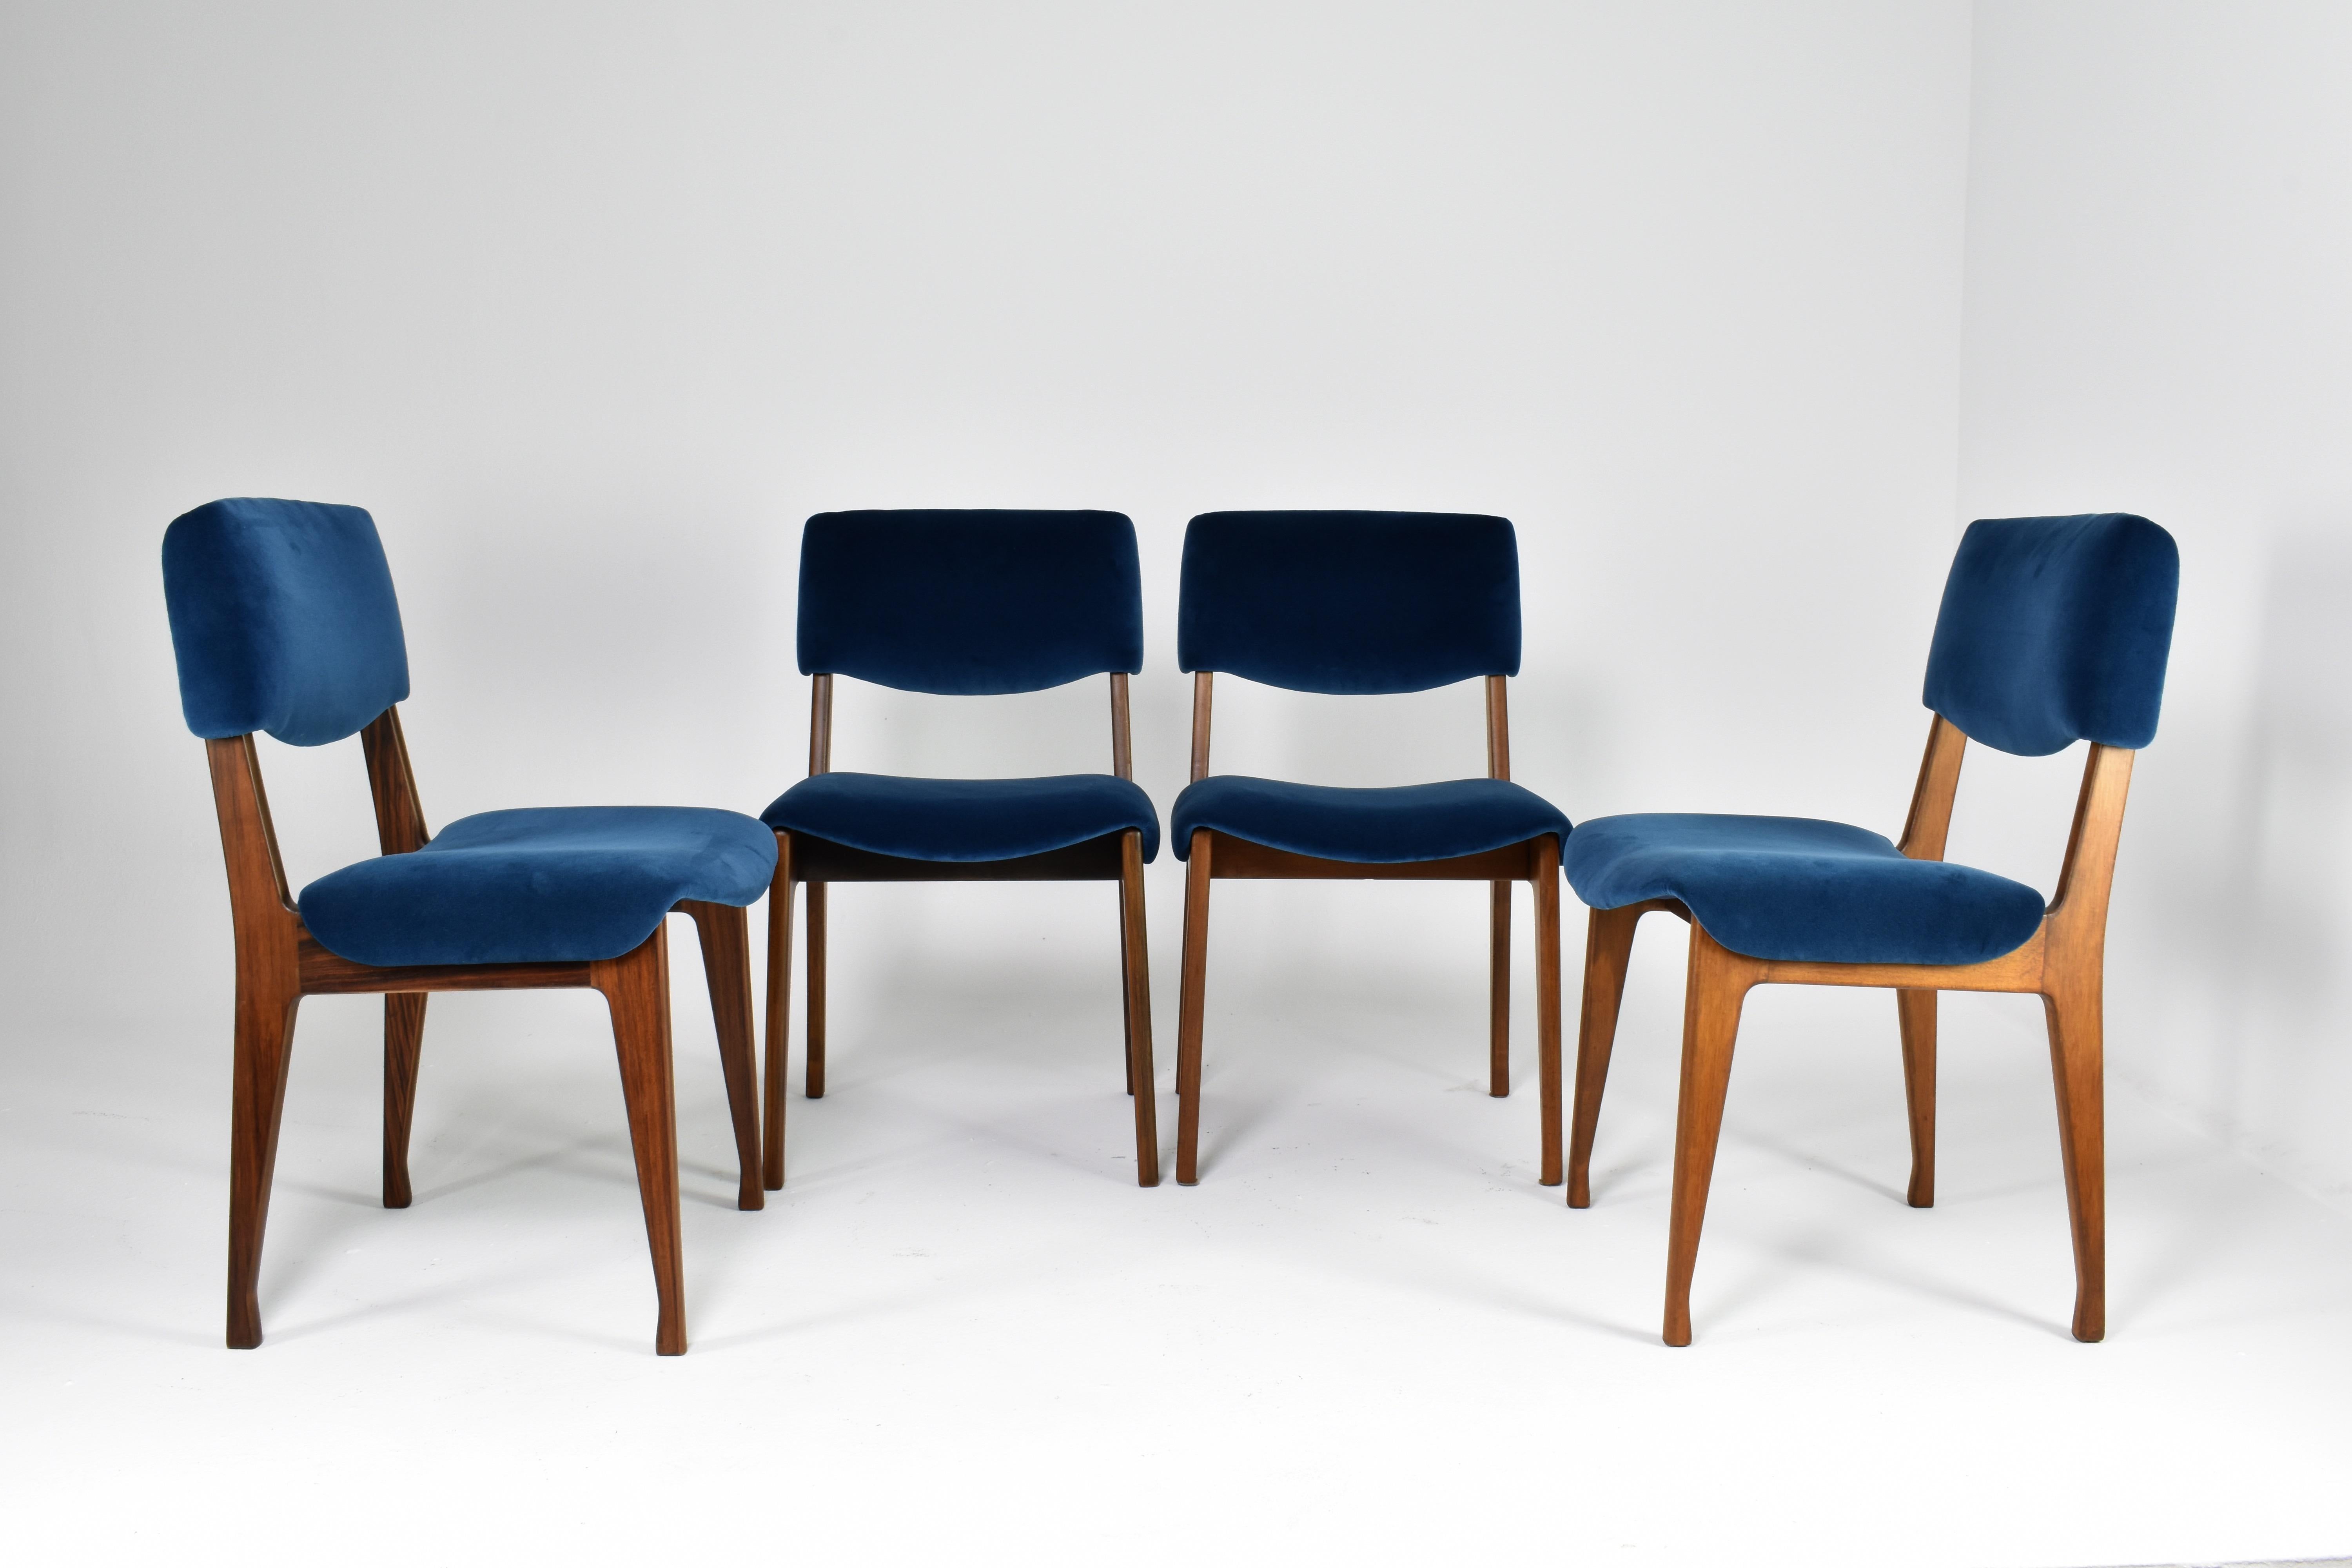 Italian Ico Parisi Wooden Dining Chairs, Set of Four, 1950s-60s For Sale 7